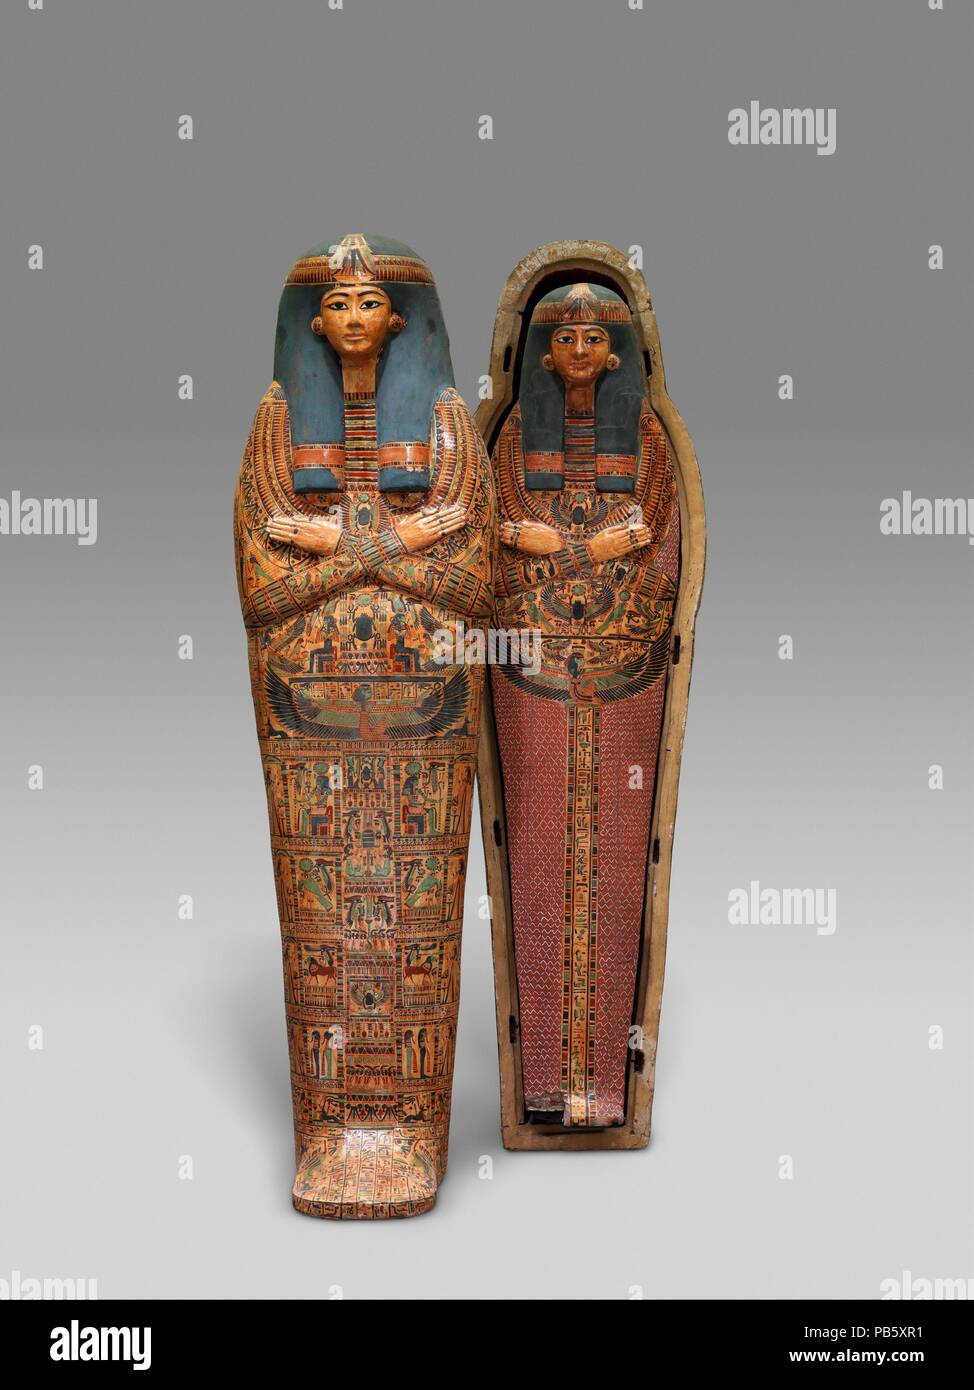 Mummy Board of the Singer of Amun-Re, Henettawy. Dimensions: L. 171.3 cm (67 7/16 in.); W. 40 cm (15 3/4 in.); D. 16 cm (6 3/8 in.). Dynasty: late Dynasty 21. Date: ca. 1000-945 B.C..  Henettawy's principal burial equipment consisted of two splendid coffins (25.3.182a, b; 25.3.183a, b) and a mummy board (25.3.184). The coffins and the mummy board are all shaped like wrapped mummies with elaborate masks fastened over the heads.  The mummy board has no pectoral on a necklace. There are, however, two emblems of the scarab that pushes the sun disk, the lower one flanked by two Re-Harakhty falcons  Stock Photo